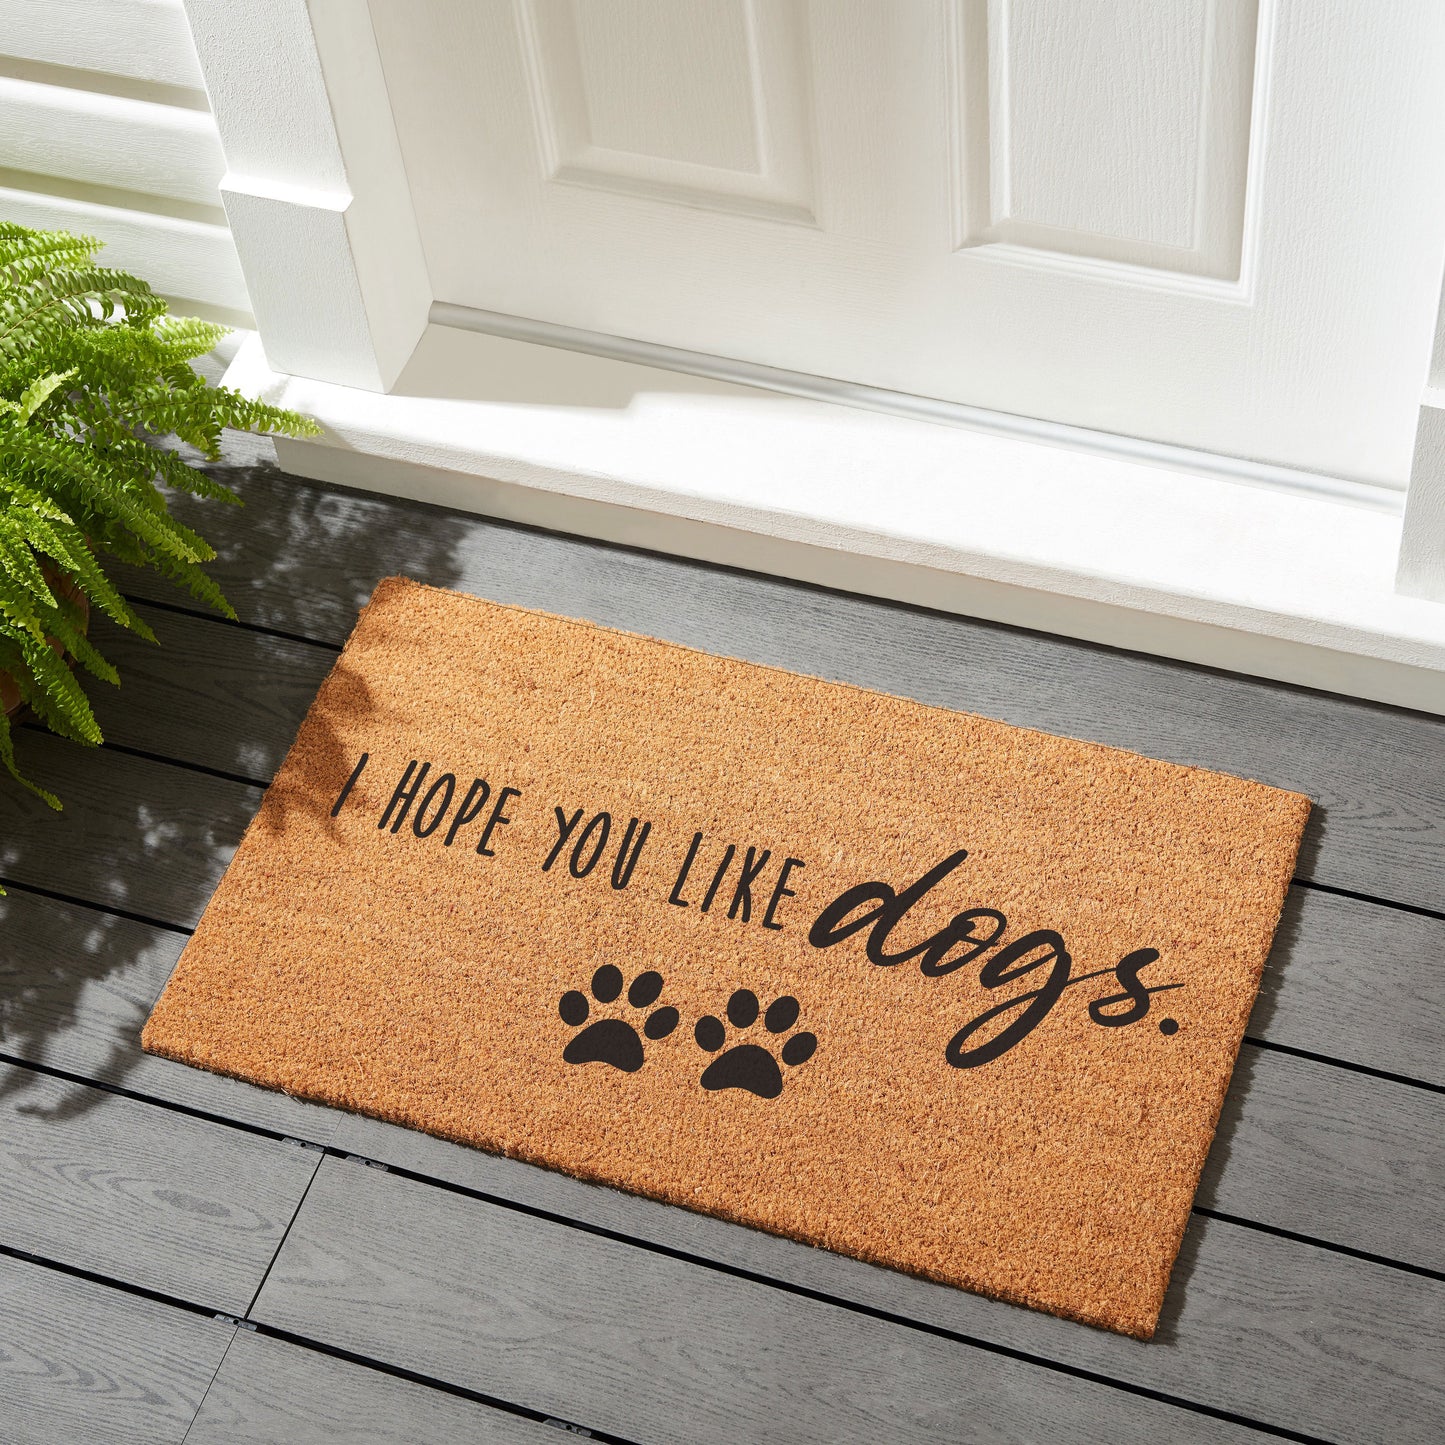 I hope you like Dogs - Coir Doormat